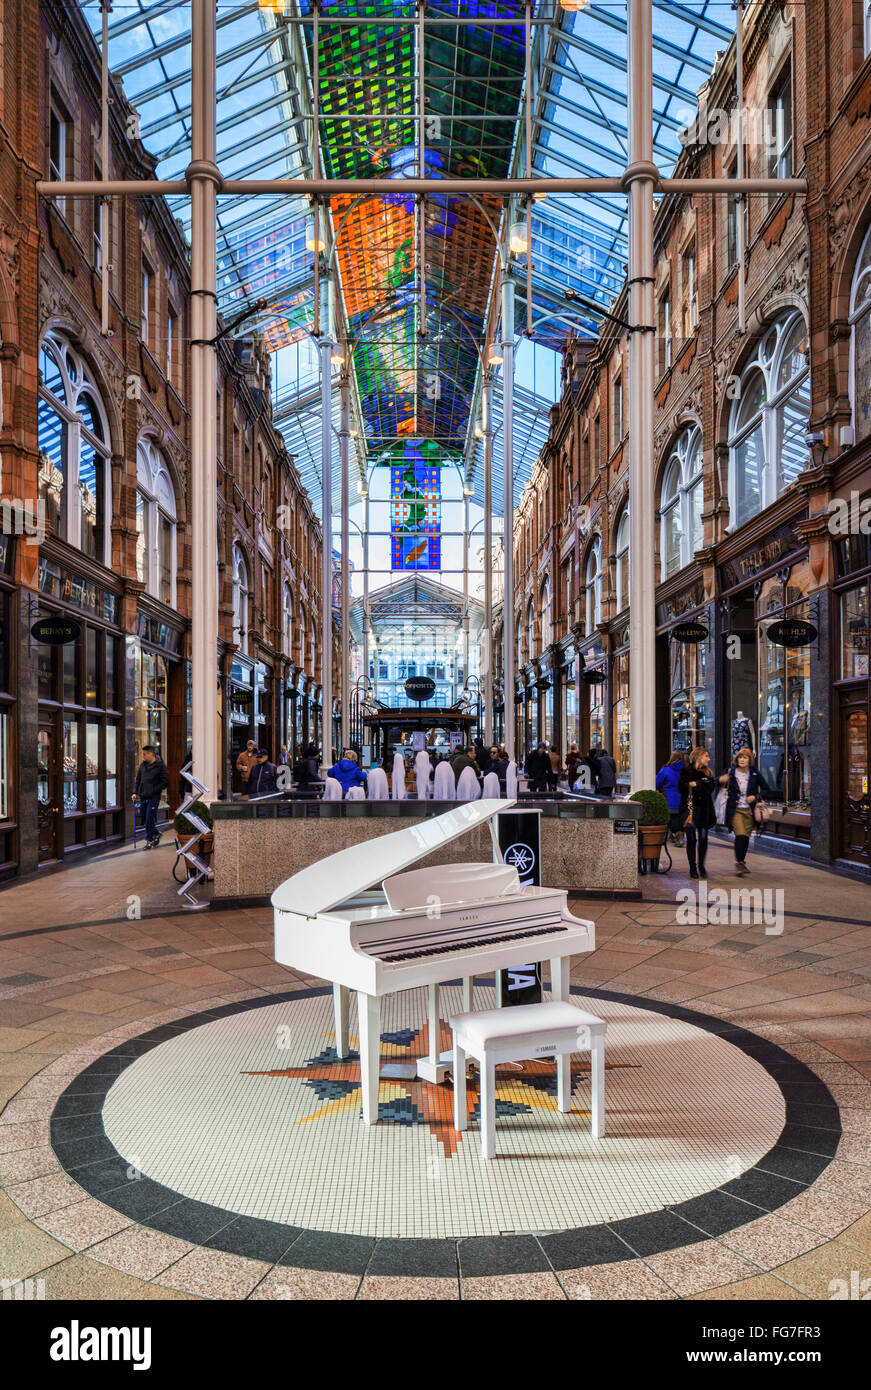 Yamaha baby grand piano in the County Arcade, Victoria Quarter, Leeds,West Yorkshire, England, UK Stock Photo